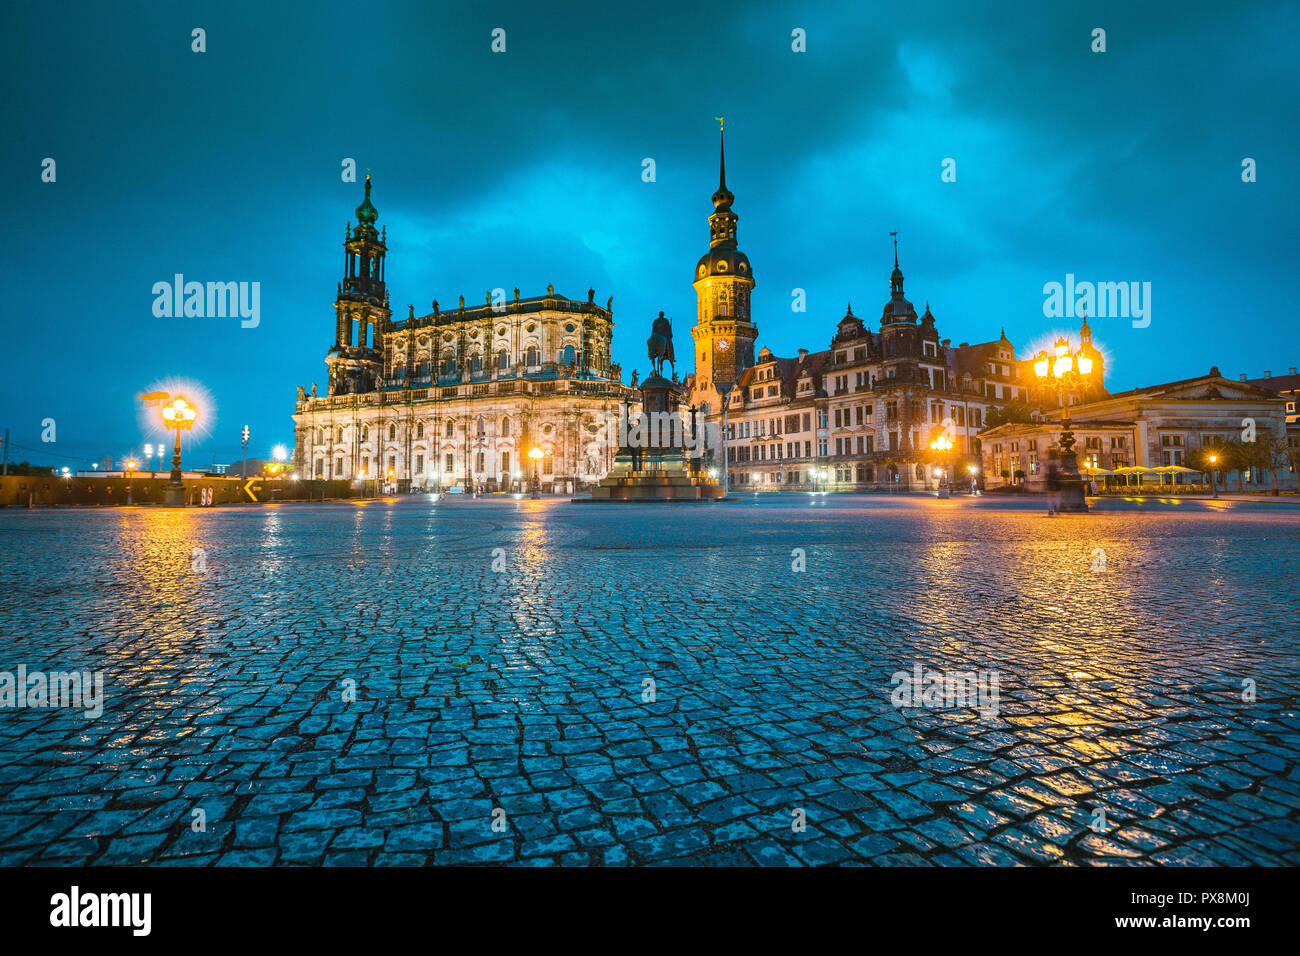 Classic twilight view of historic Dresden city center illuminated in beautiful evening twilight with dramatic sky during blue hour at dusk, Saxony, Ge Stock Photo